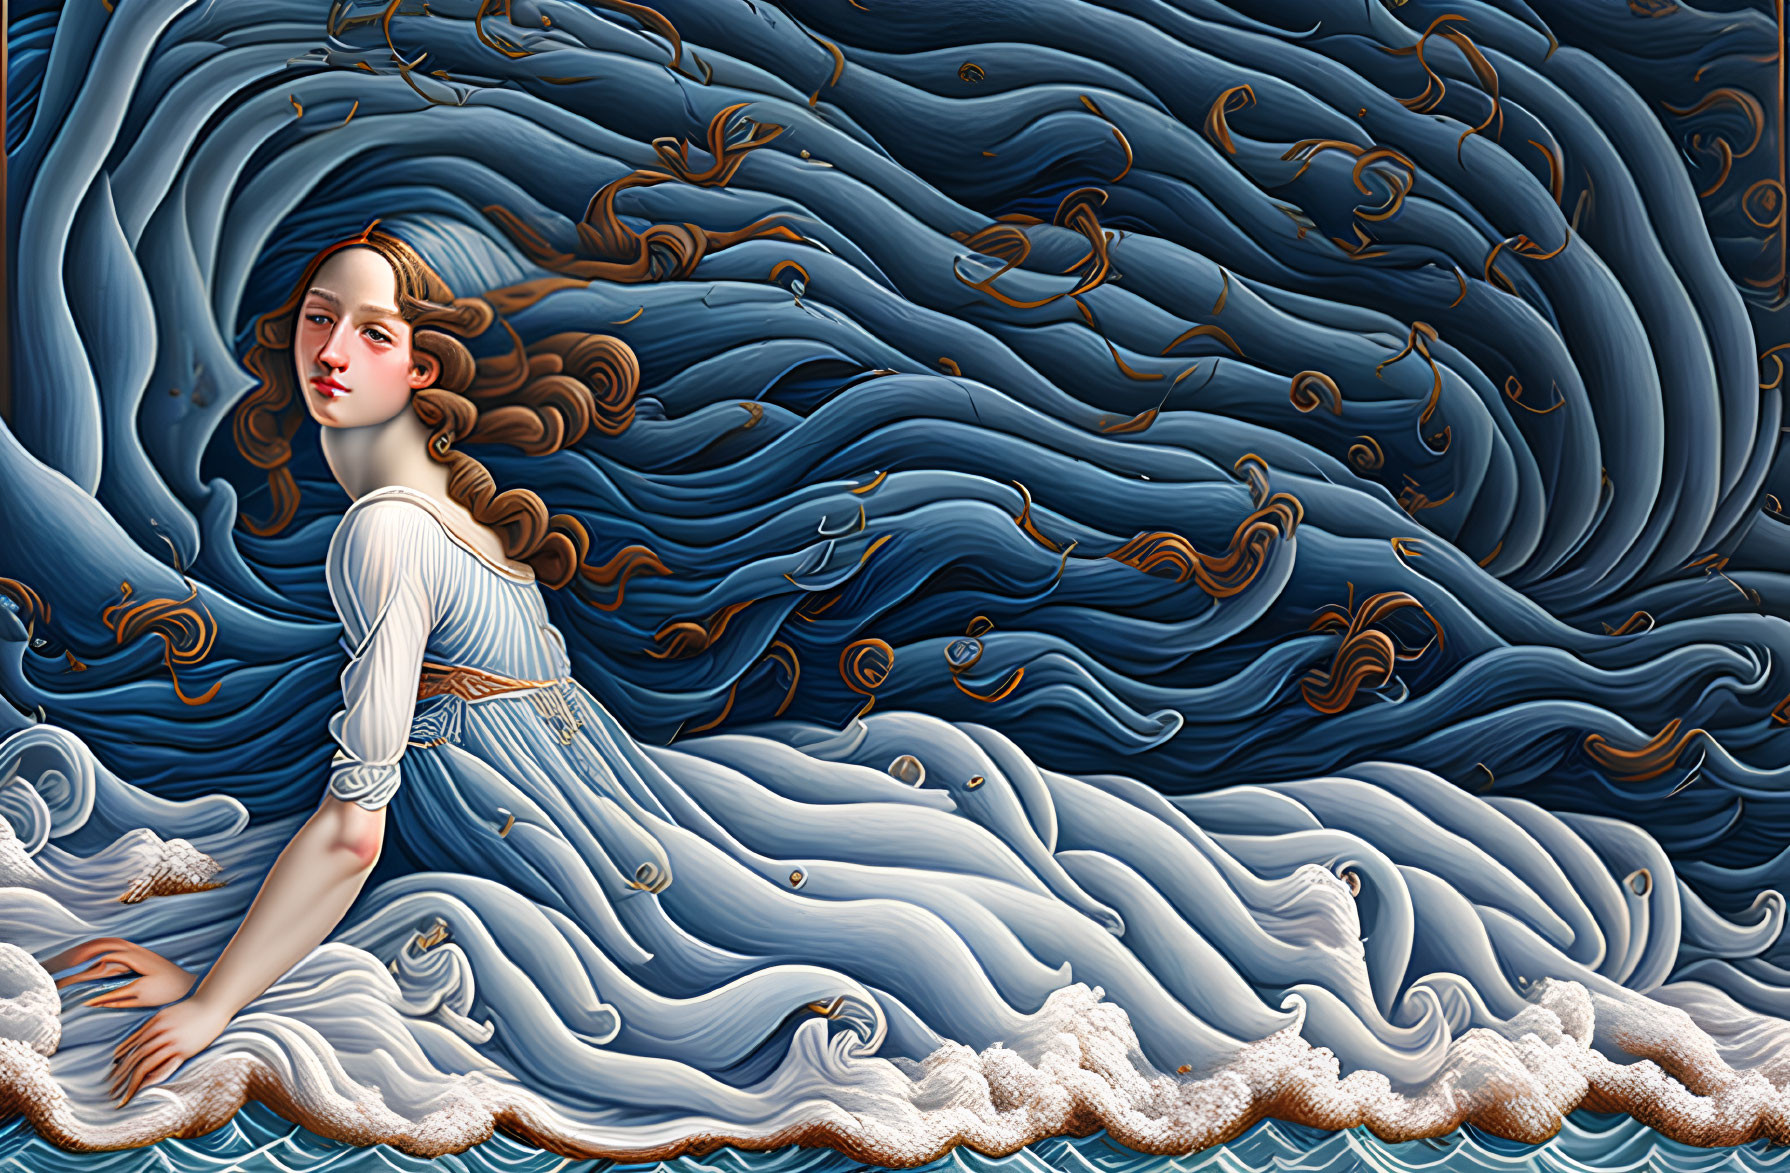 Illustration of woman merging with blue ocean waves in surreal style